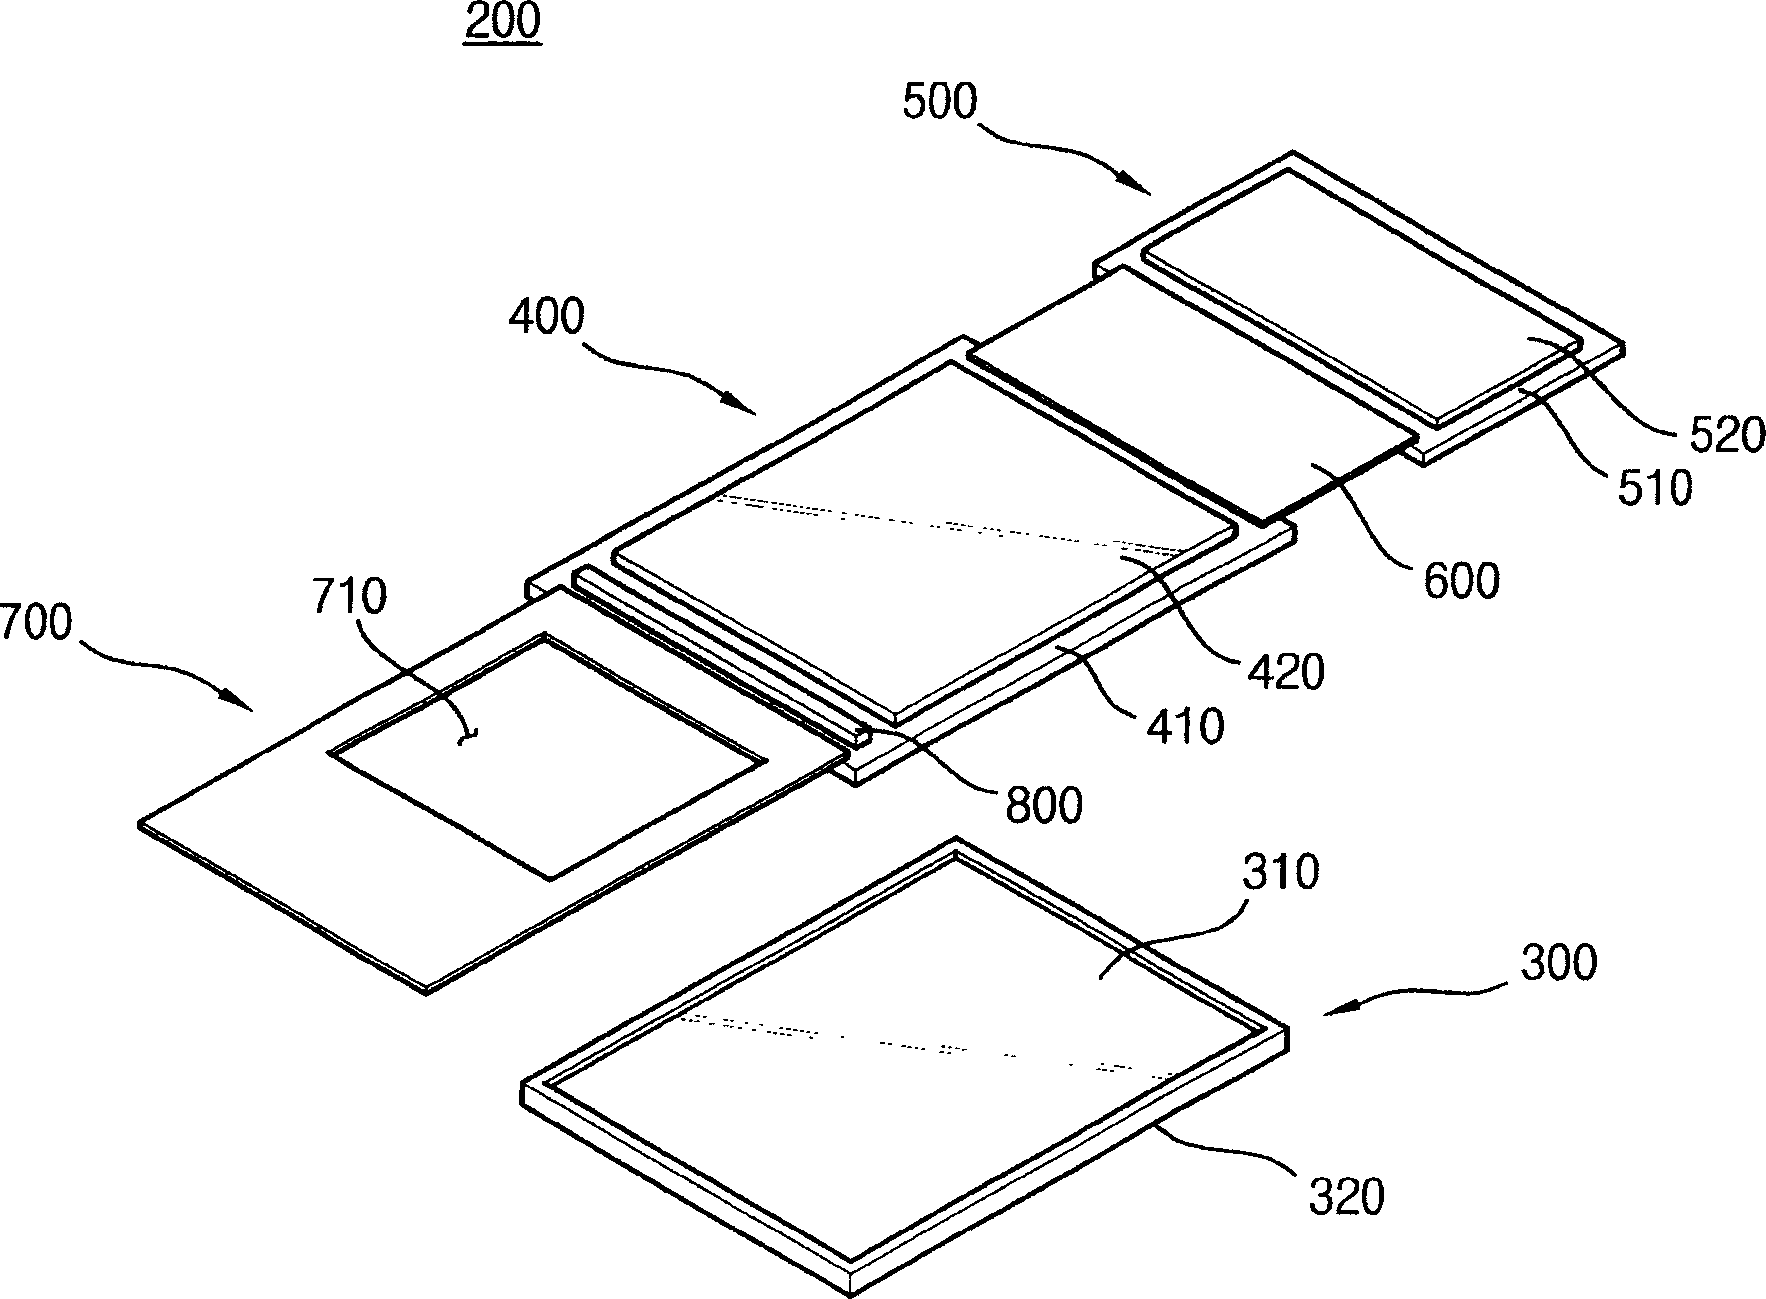 Jig and method of manufacturing a display device using the same